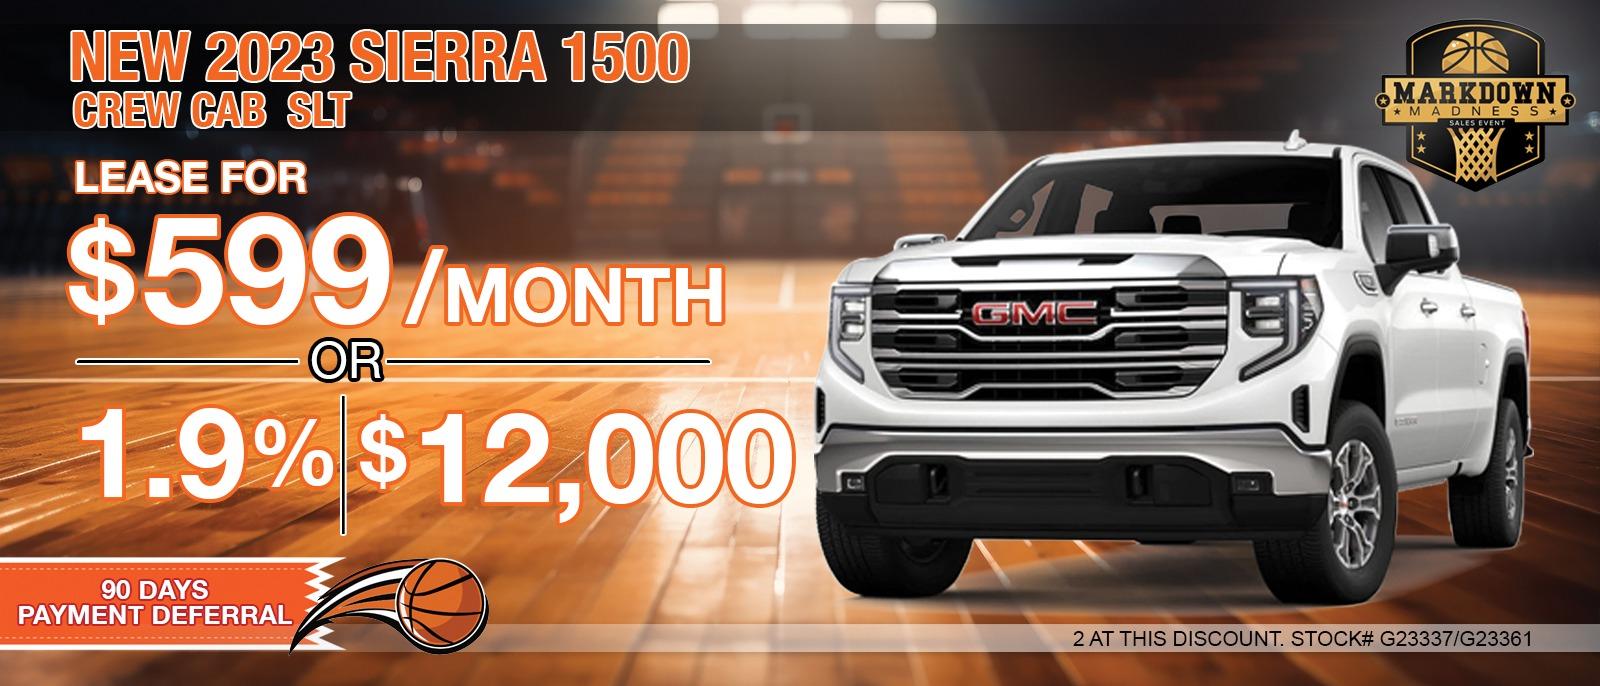 2023 GMC SIERRA 1500 CREW CAB / PRO/ REGULAR CAB/ SLT. Your Net Savings After All Offers save up to $12,000